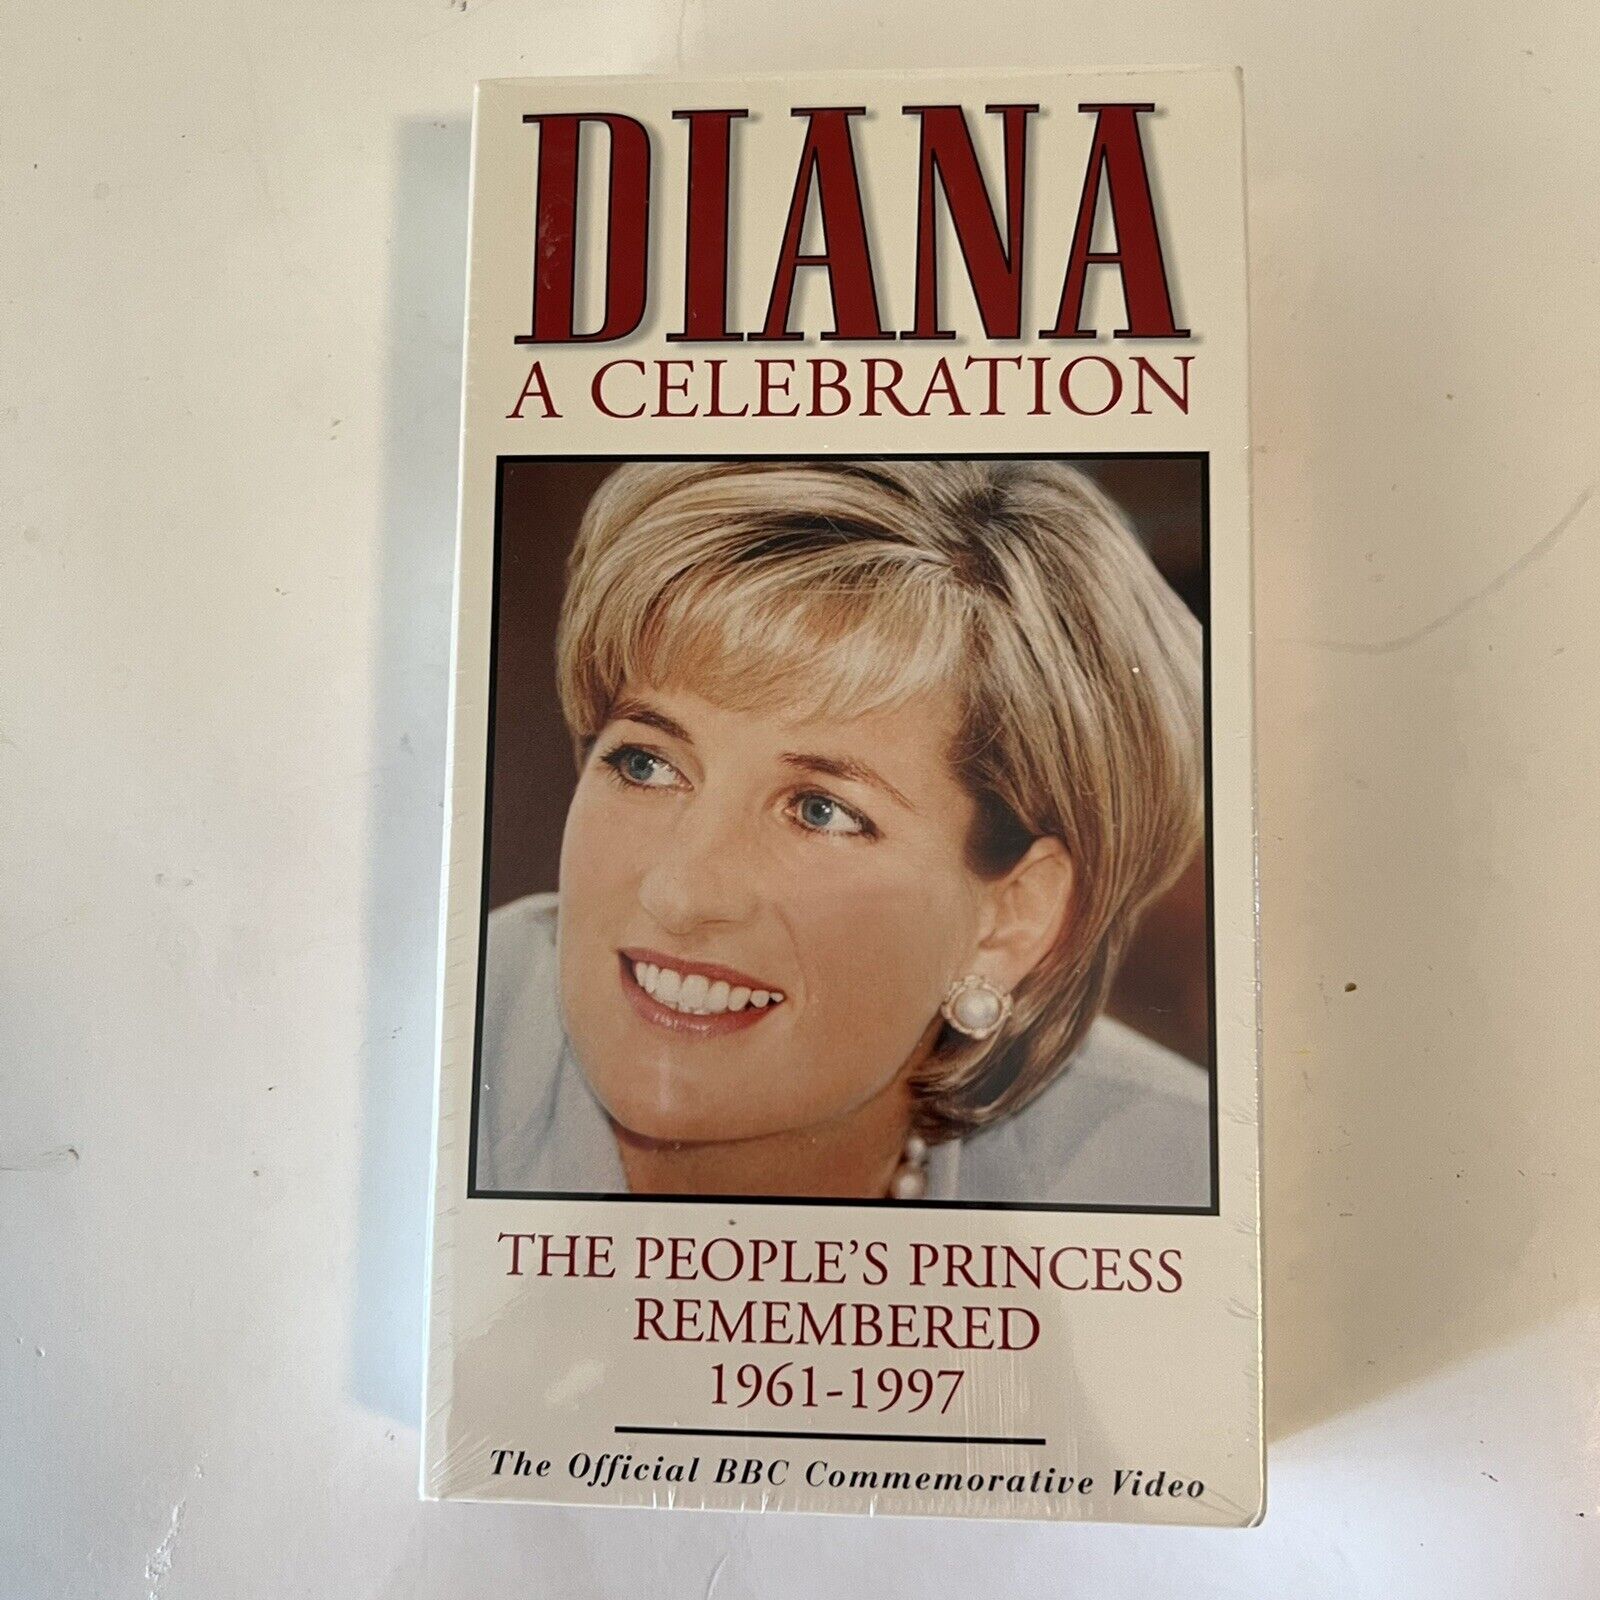 Primary image for Diana: A Celebration (VHS, 1997) | Free Shipping New Sealed #98-1162